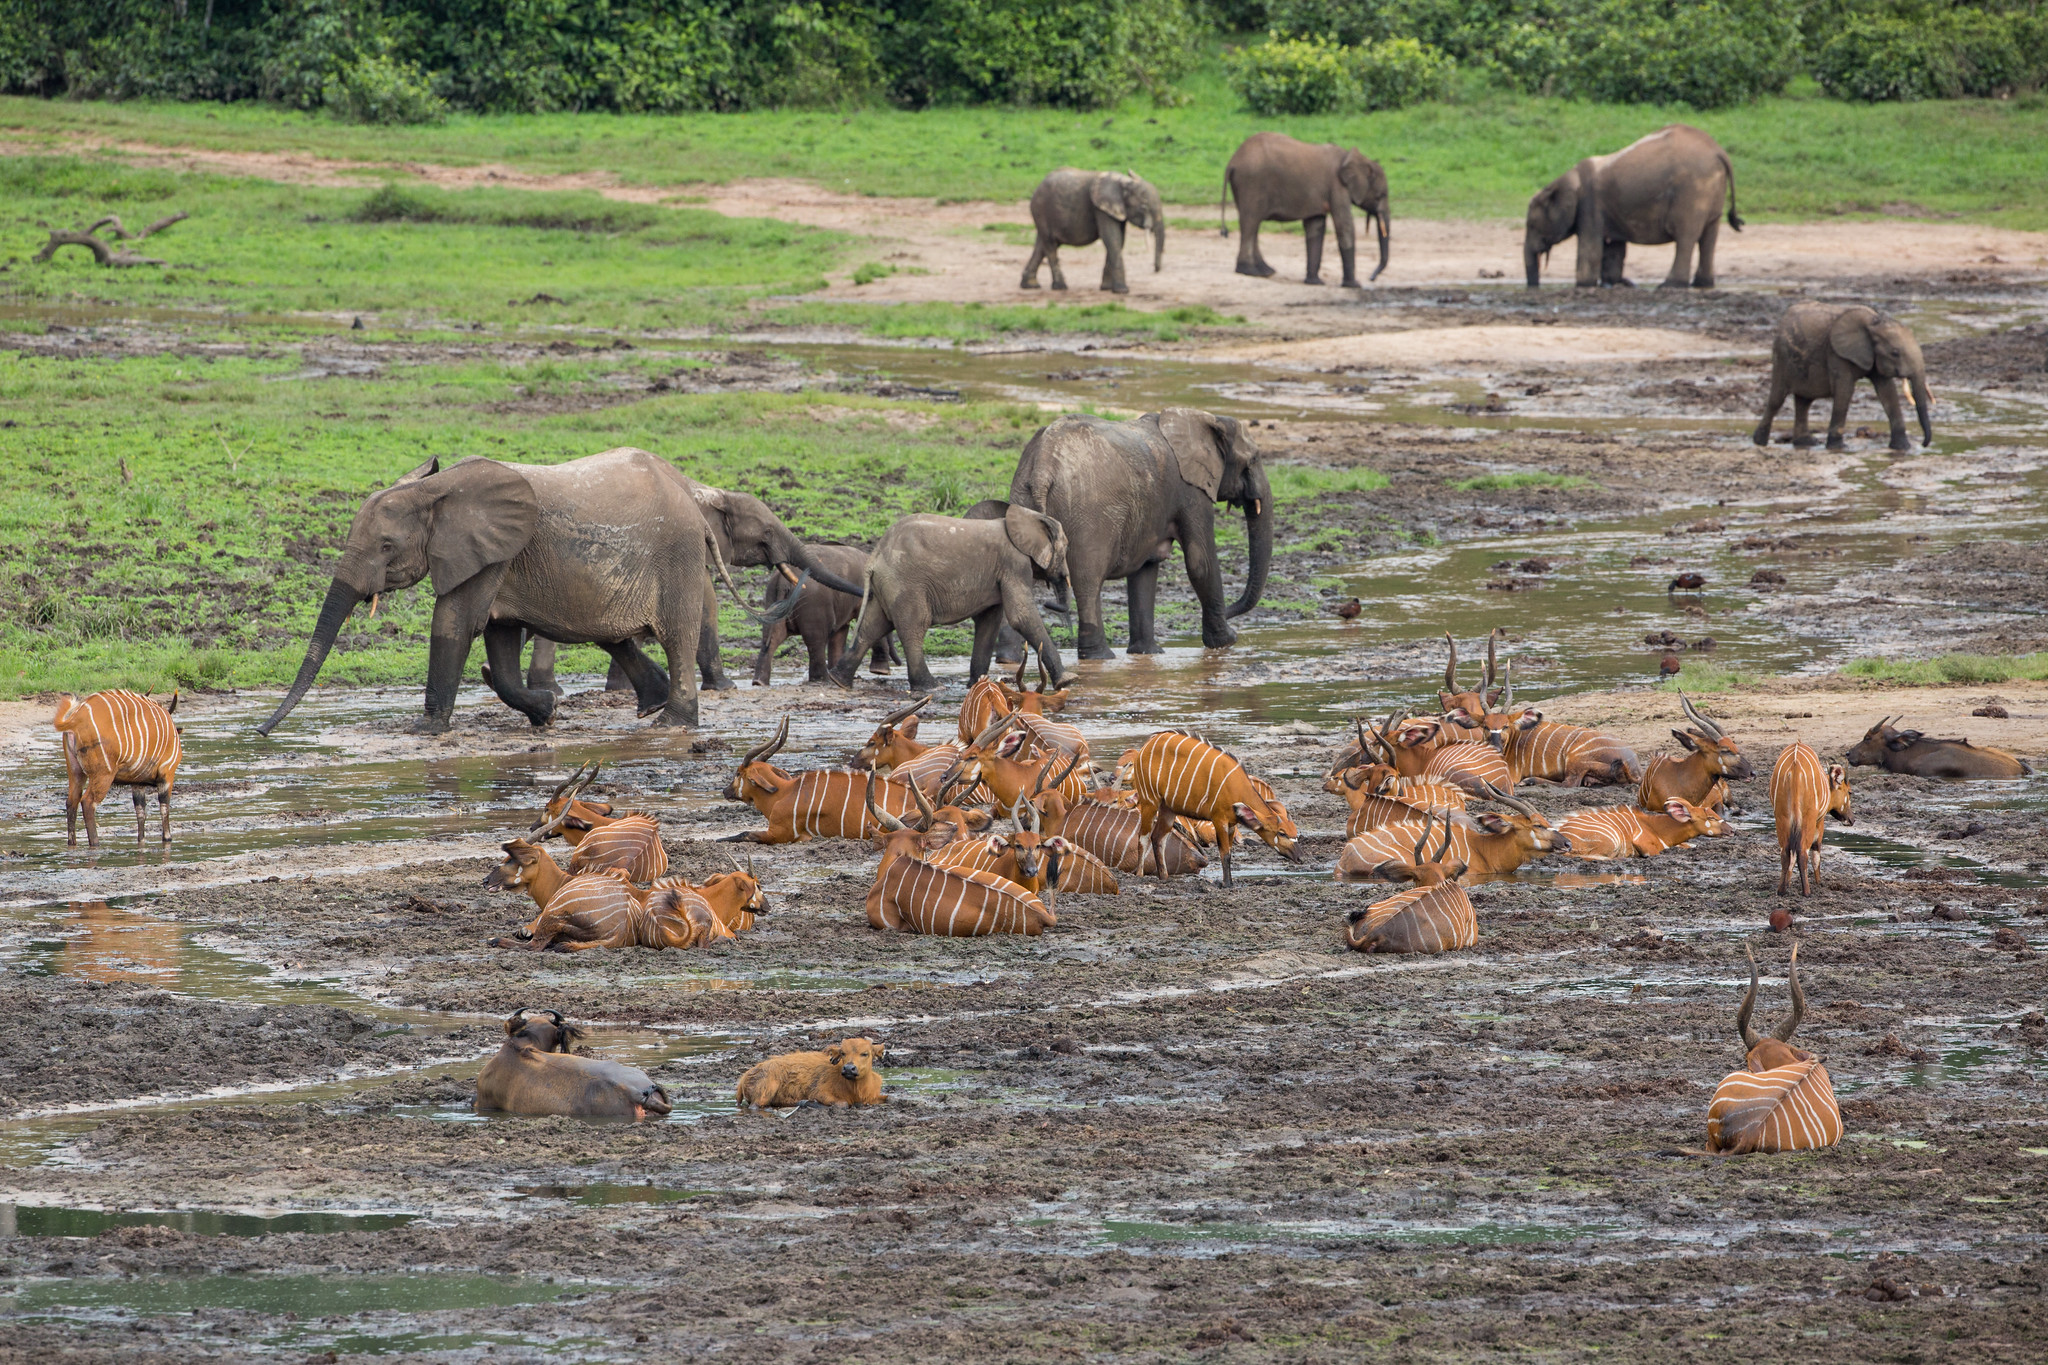 African forest elephants, lowland bongos, and forest buffalos in the Dzanga Sangha Special Reserve, Central African Republic. Image credit: Gregoire Dubois